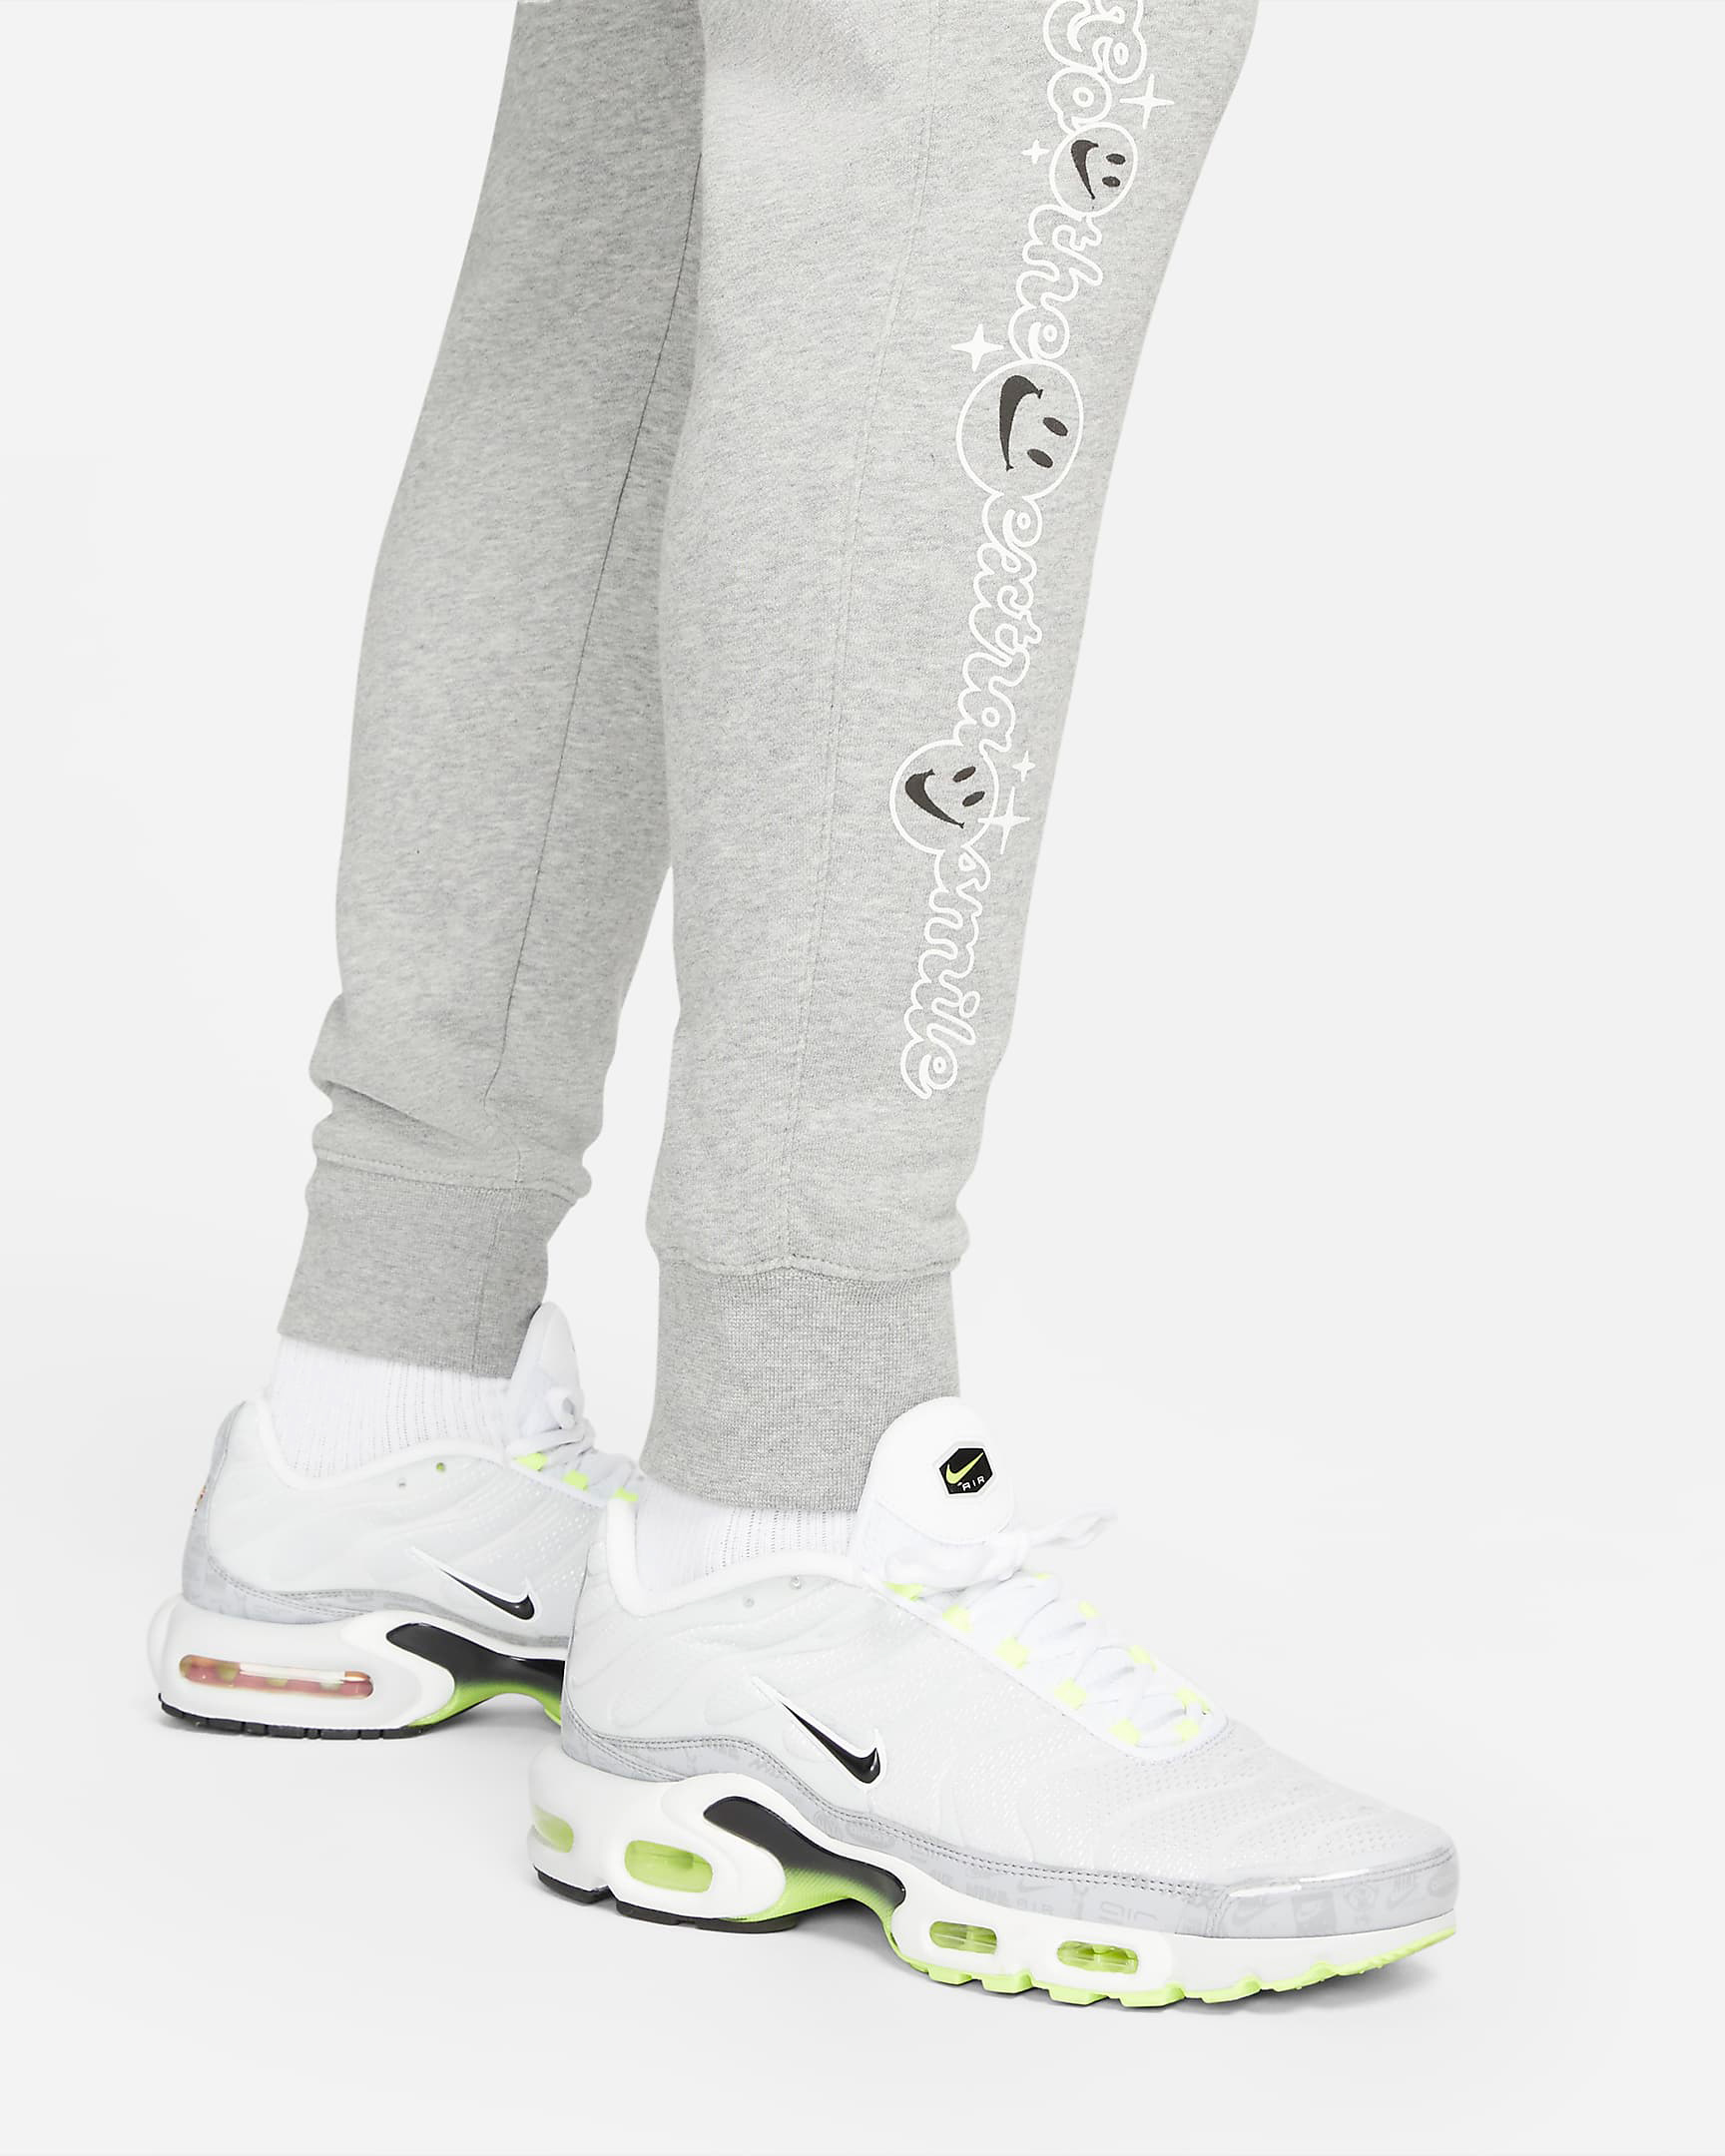 nike-go-the-extra-smile-jogger-pants-grey-6